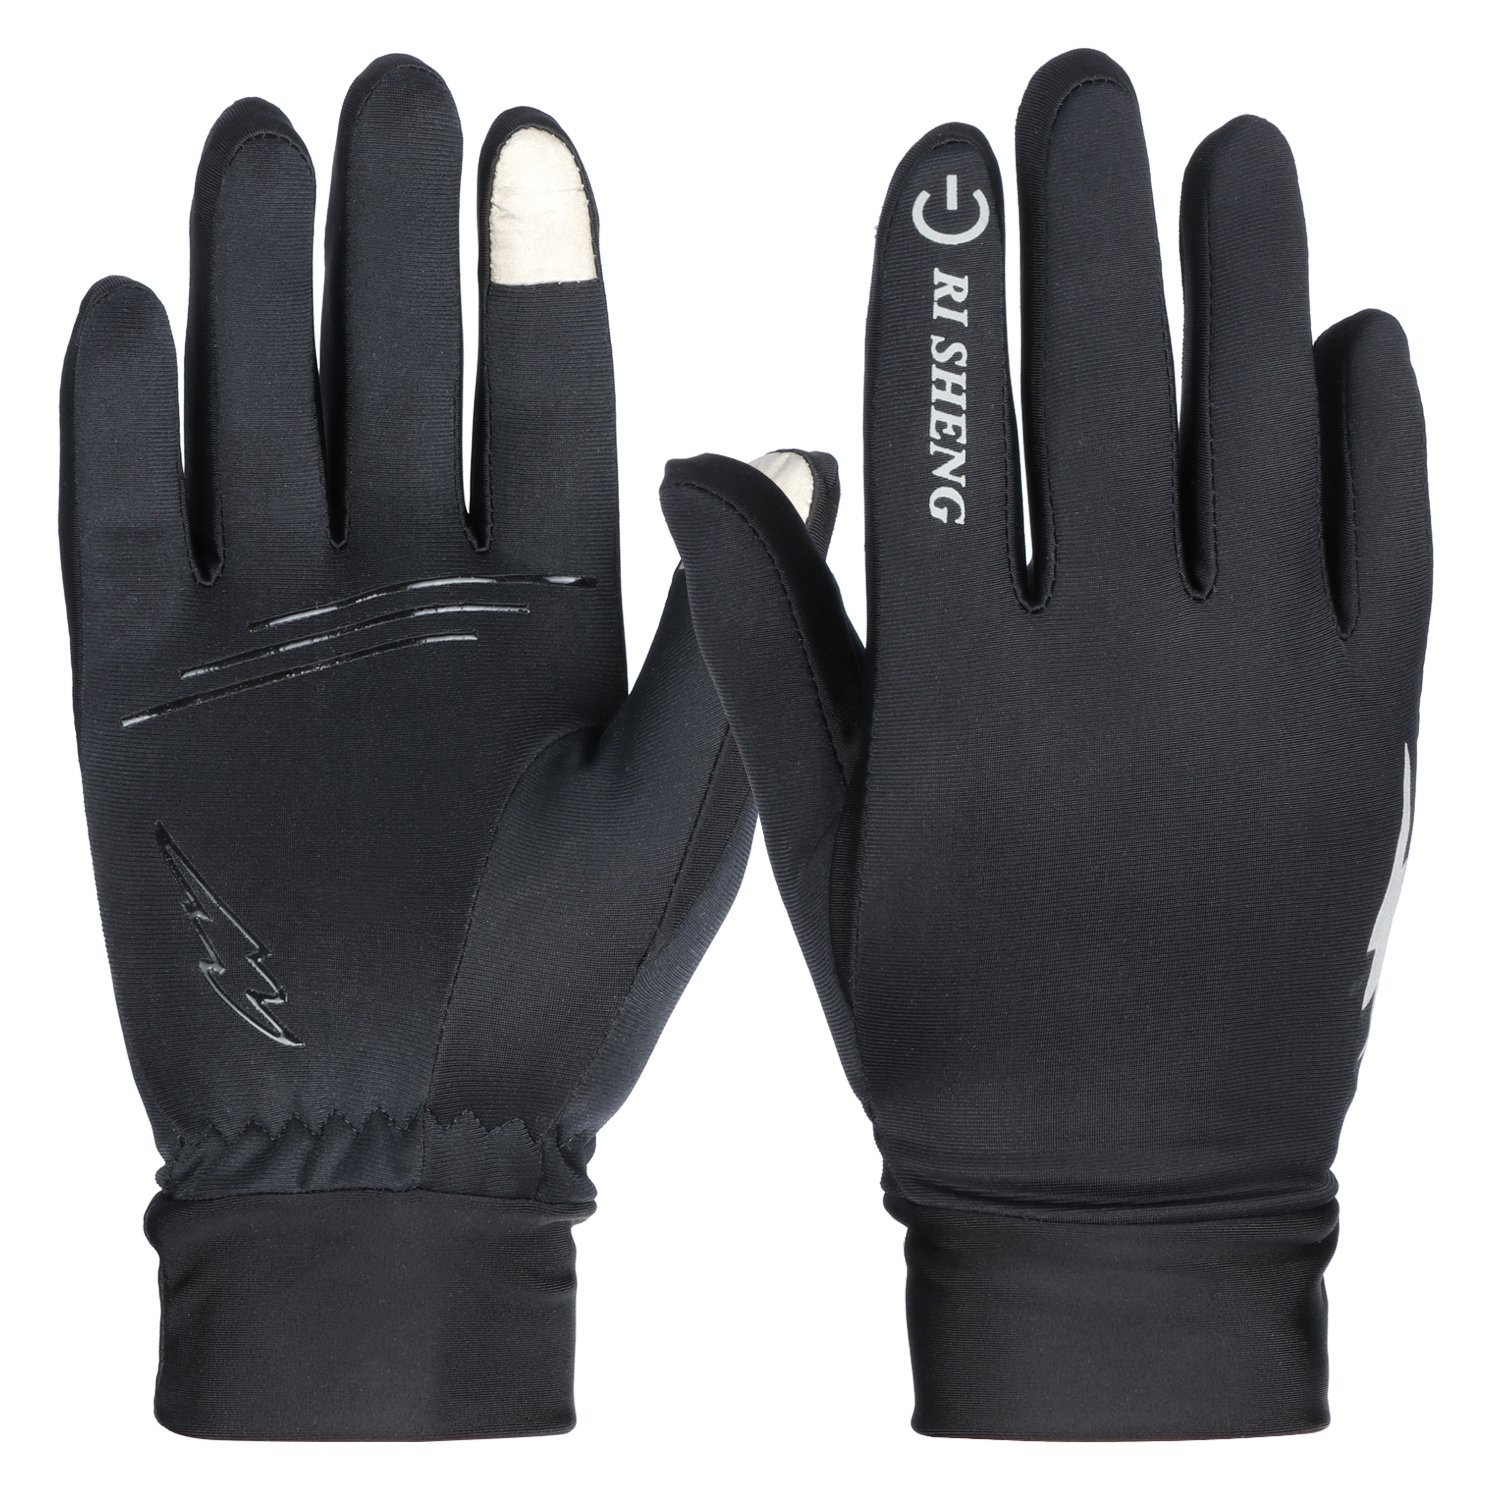 HiCool Winter Thermal Gloves - 09 - black 2 color